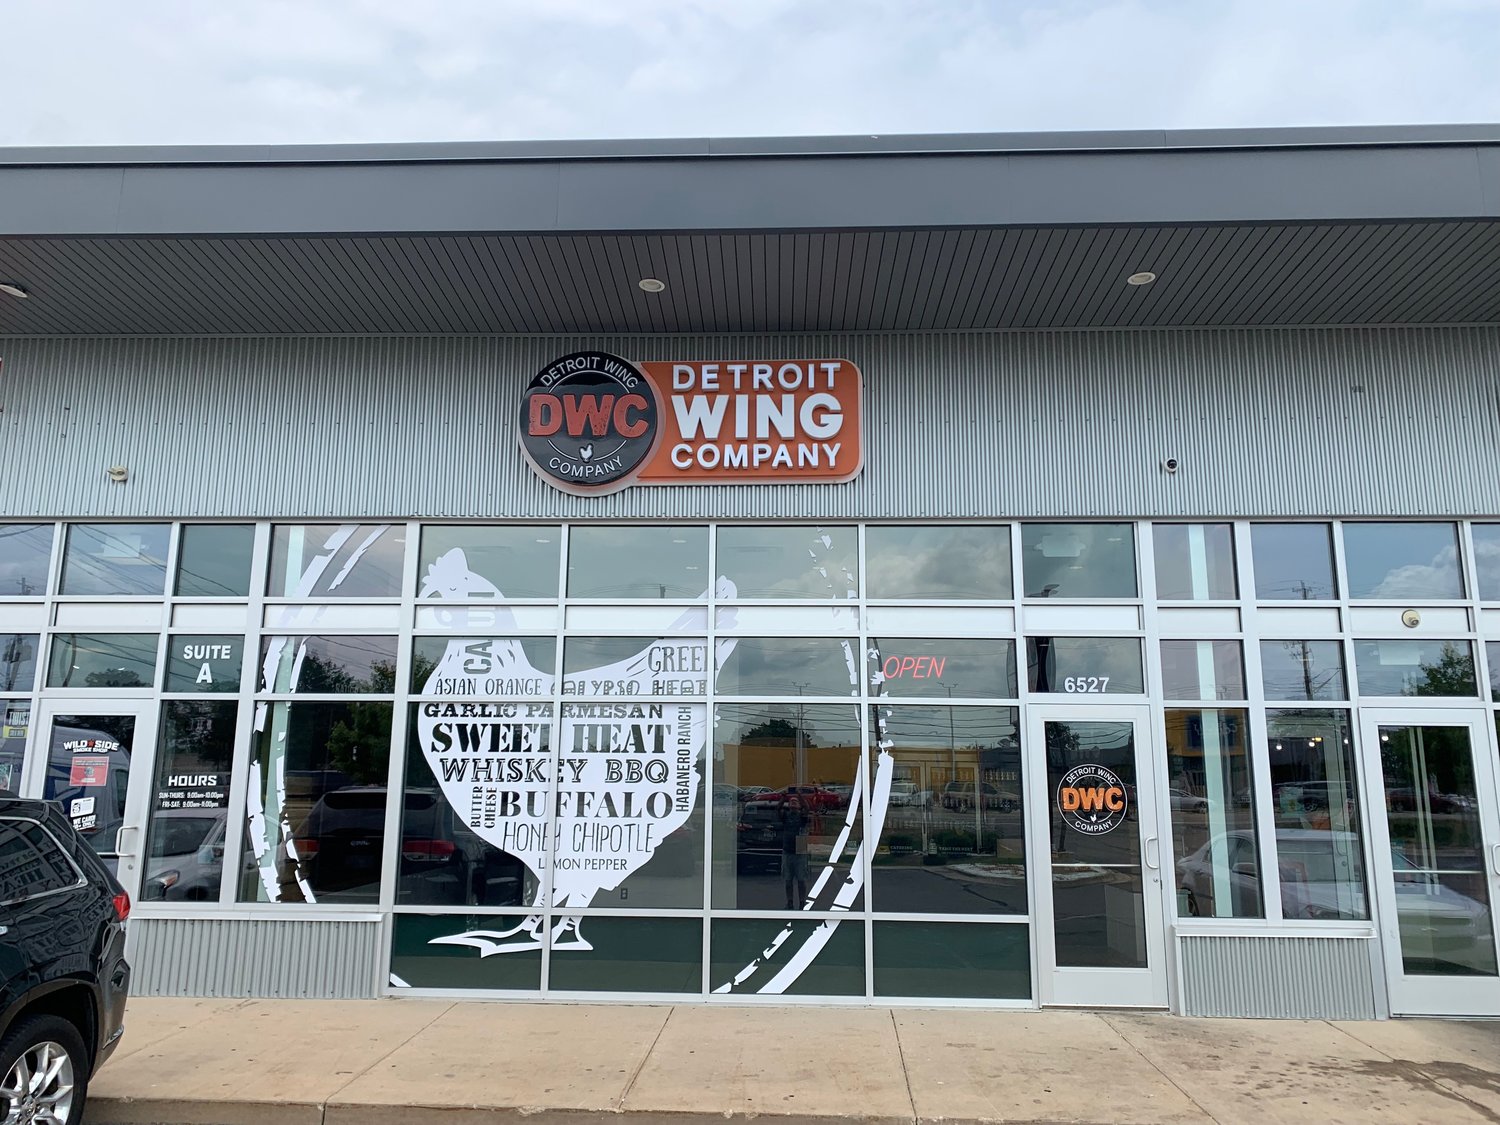 Detroit Wing Co. opened its first Lansing location in July at 6527 S. Cedar St.